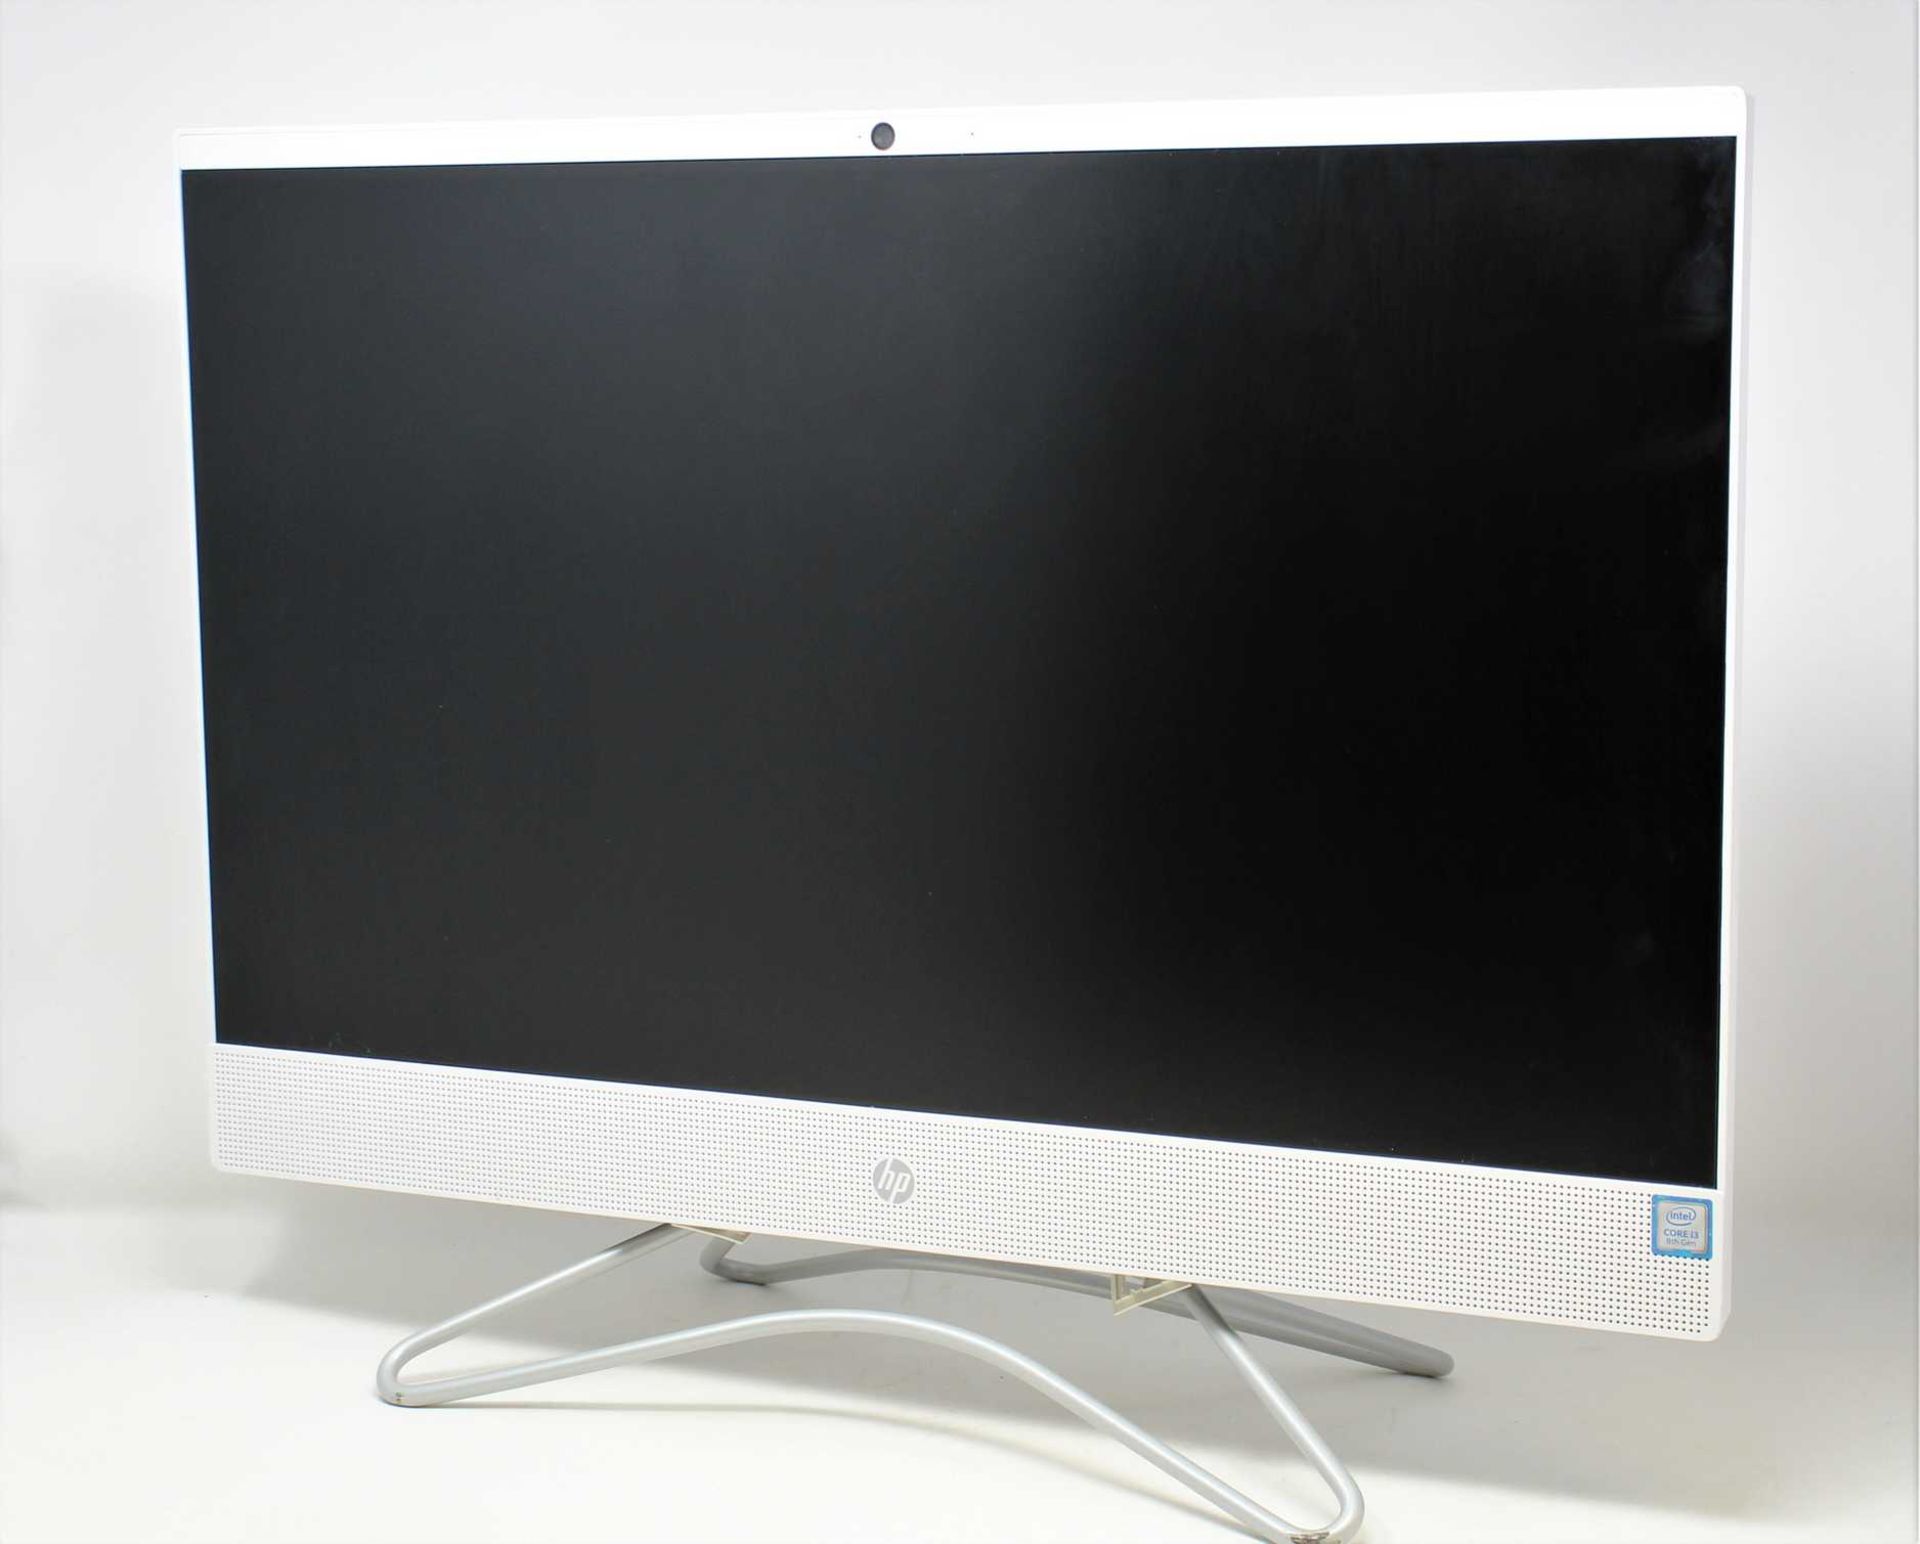 SOLD FOR SPARES OR REPAIR, COLLECTION ONLY: A pre-owned HP 24-f0015na Intel Core i3 All-in-One